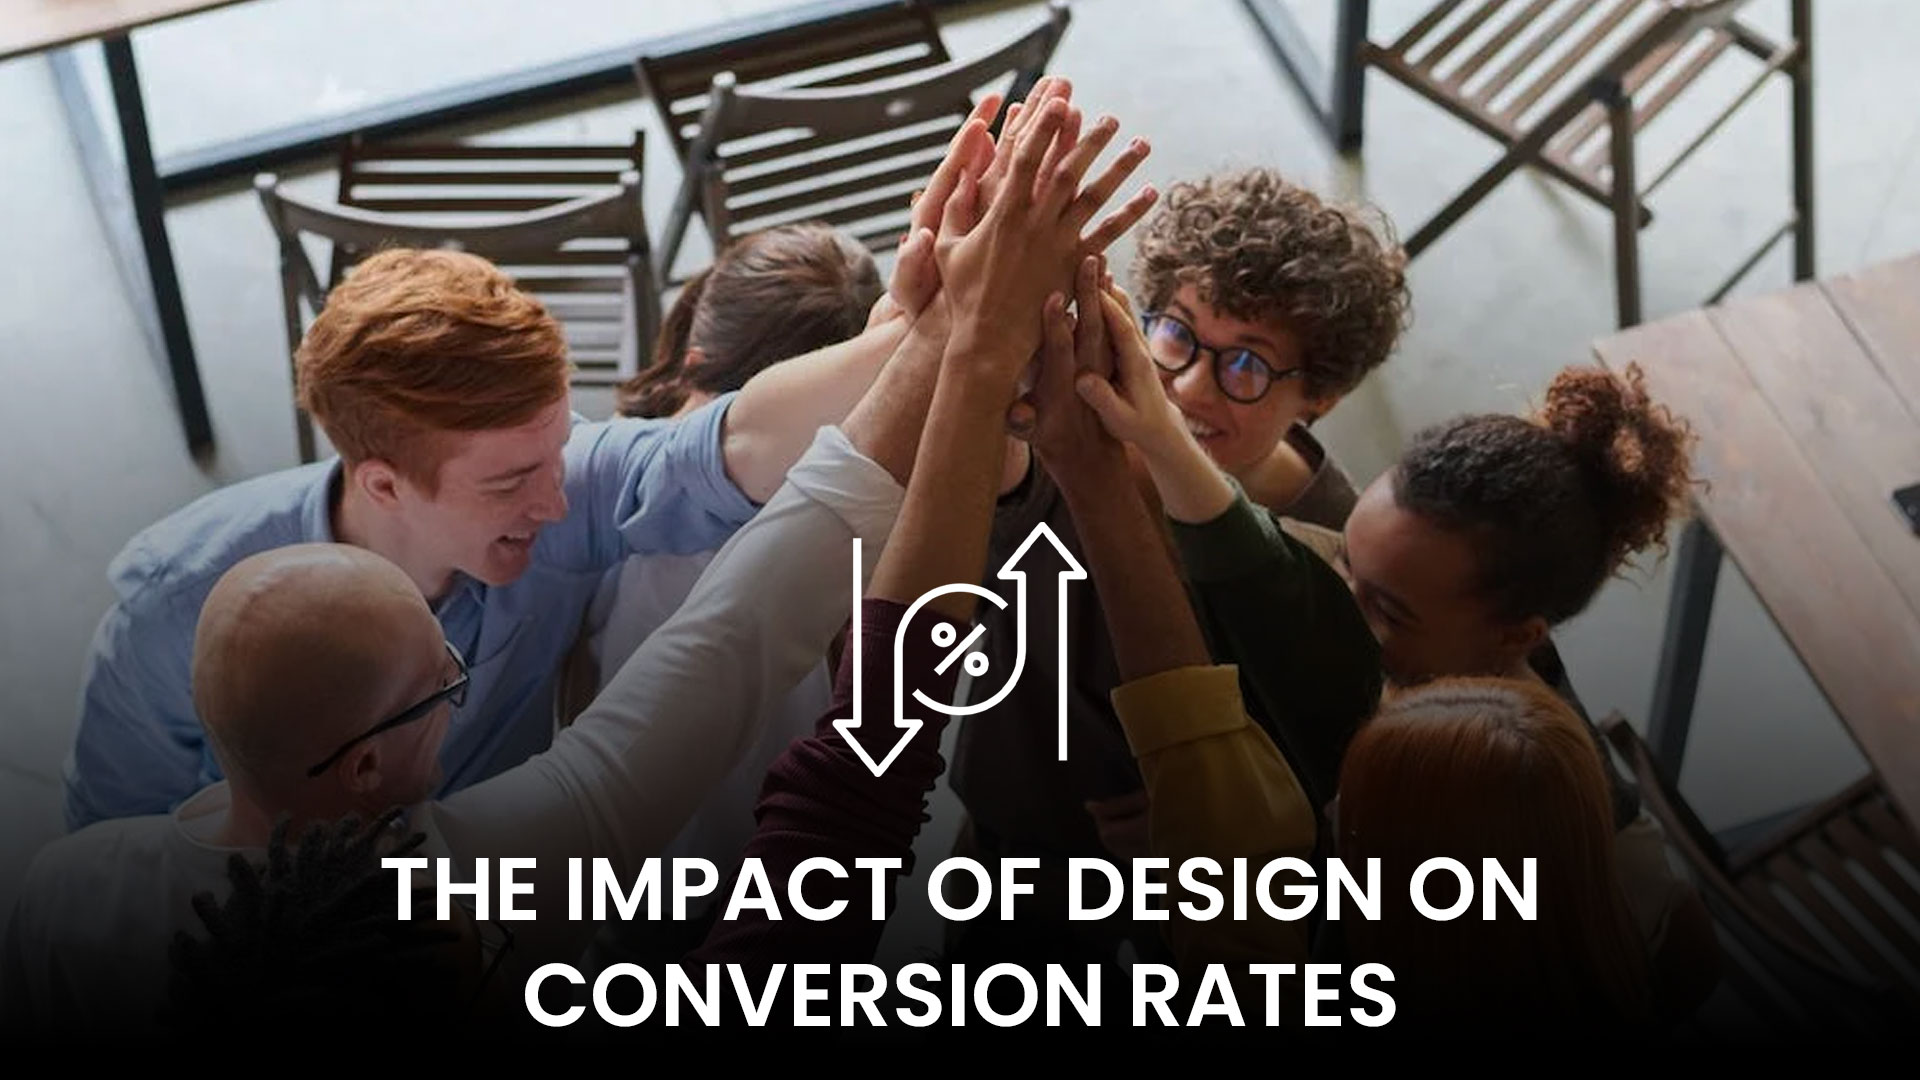 The Impact of Design on Conversion Rates